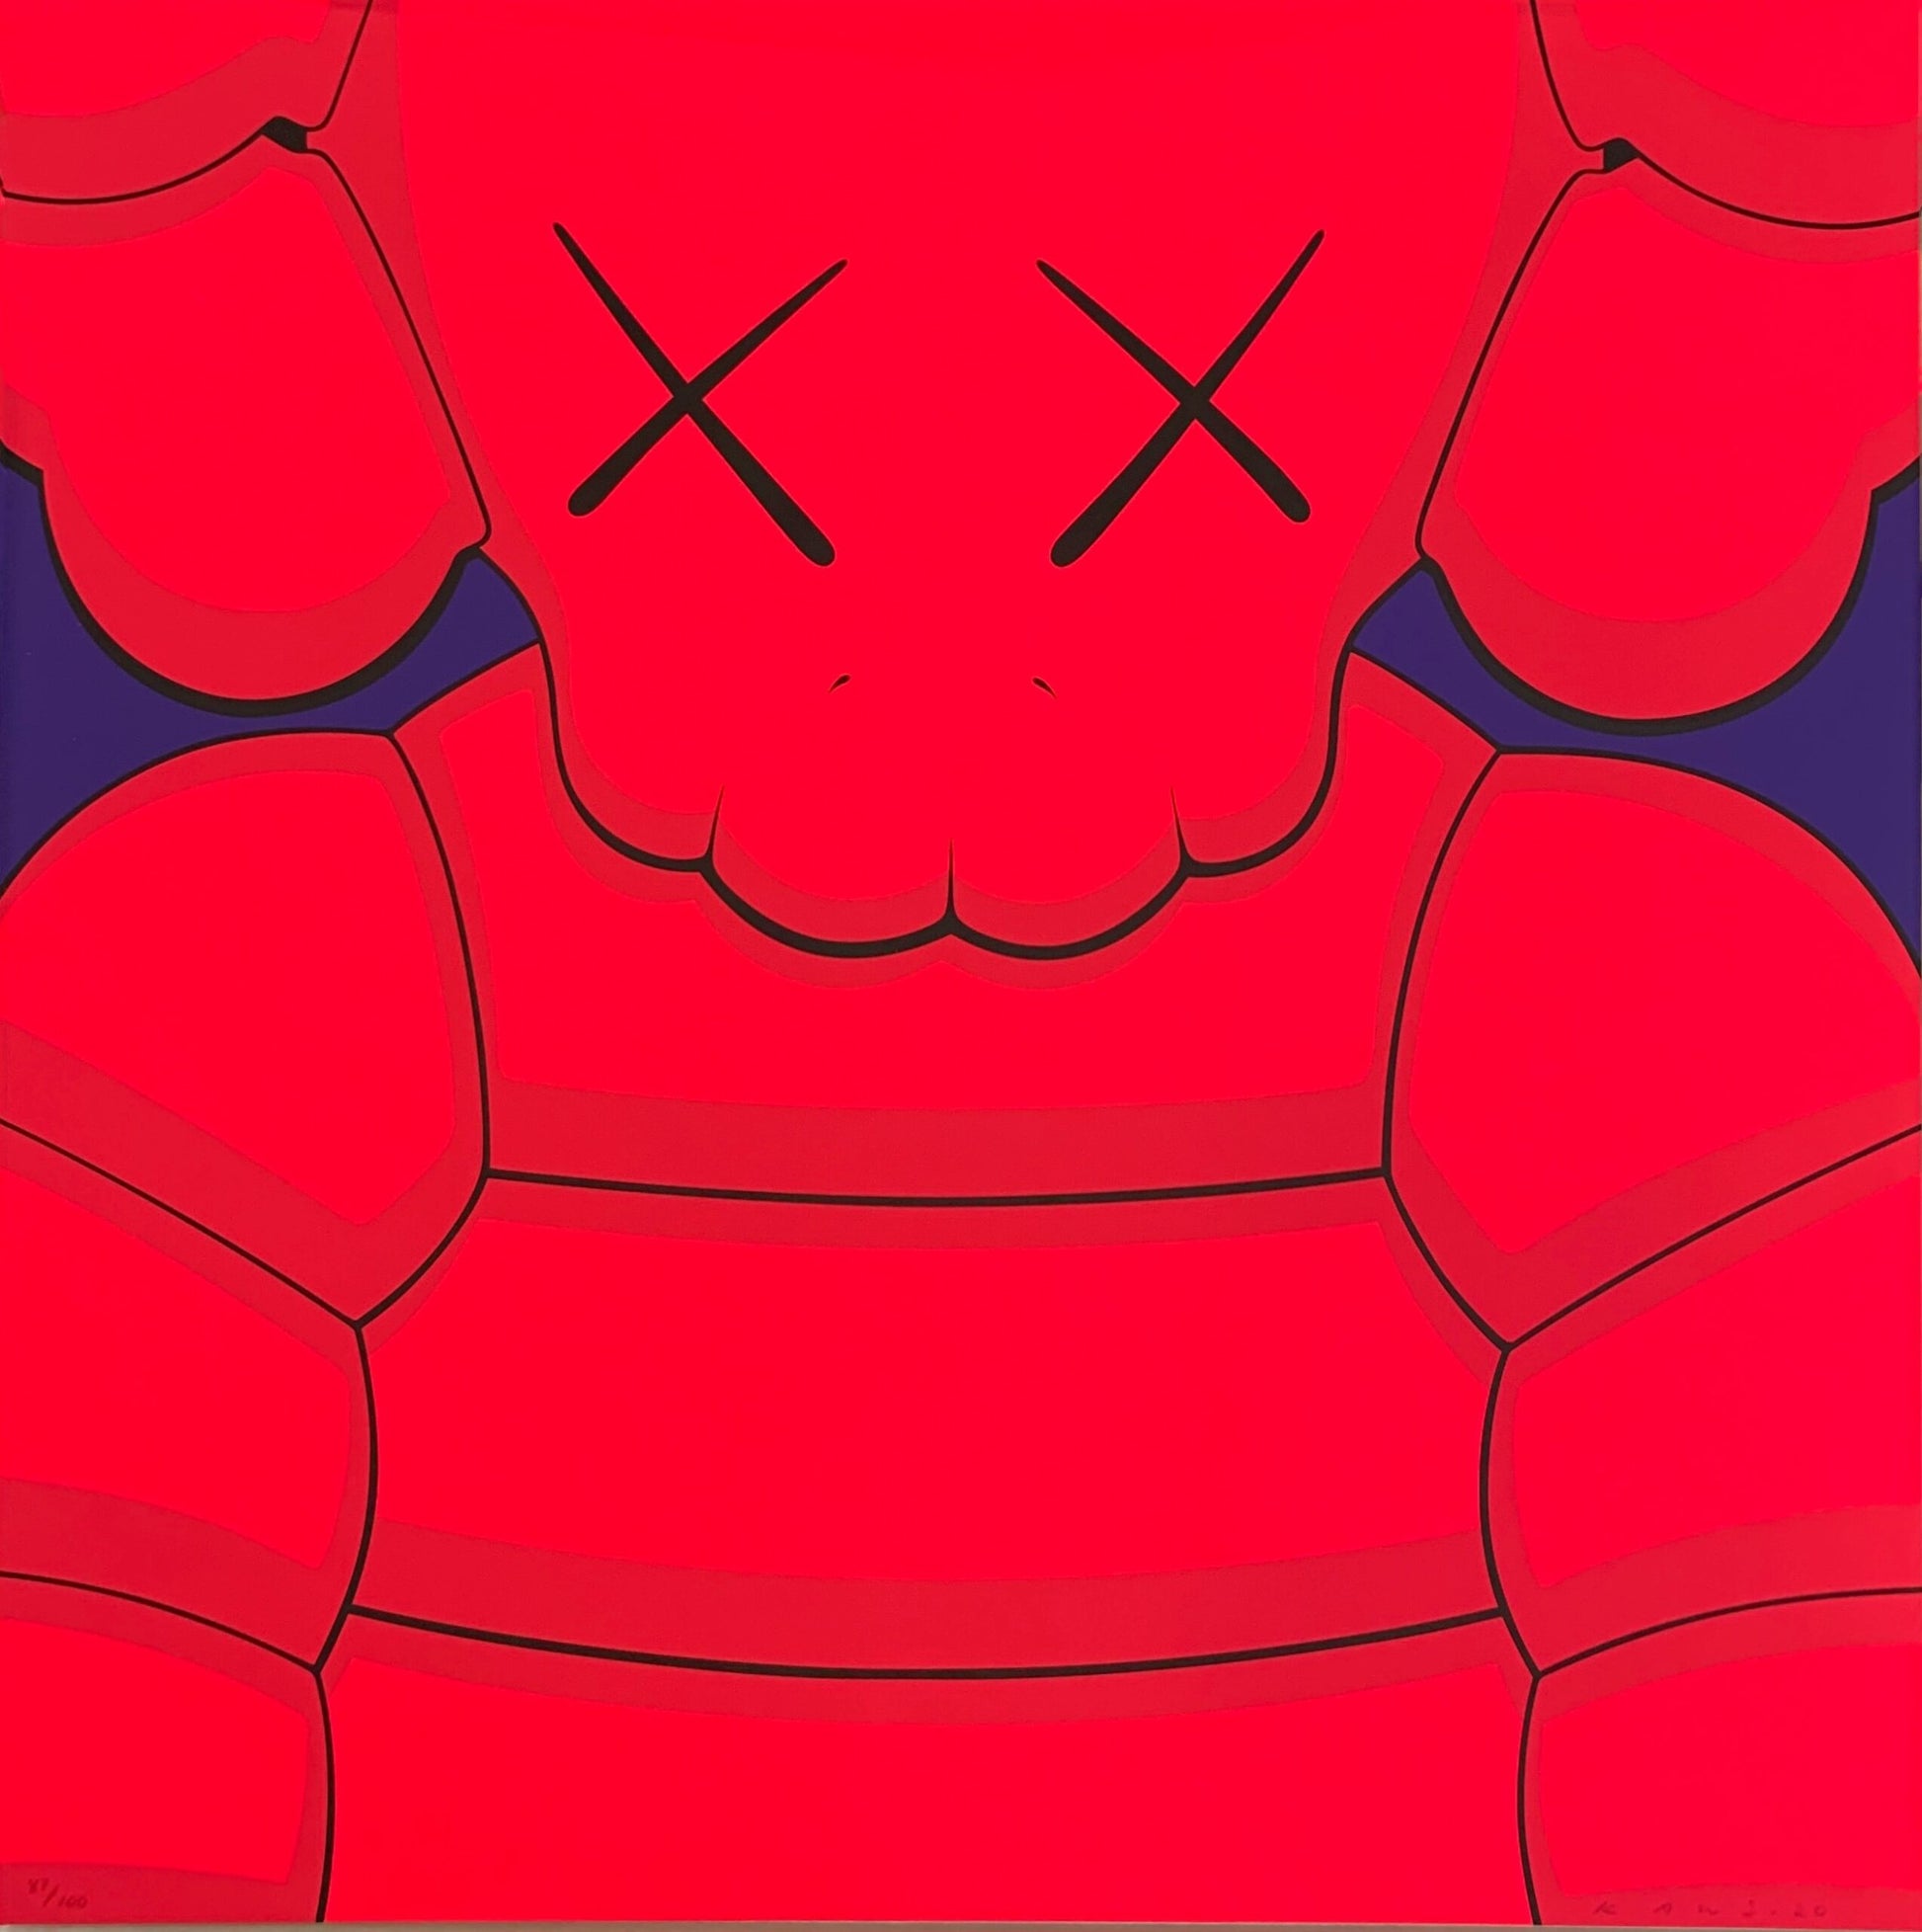 KAWS - What Party Arterego Art Gallery